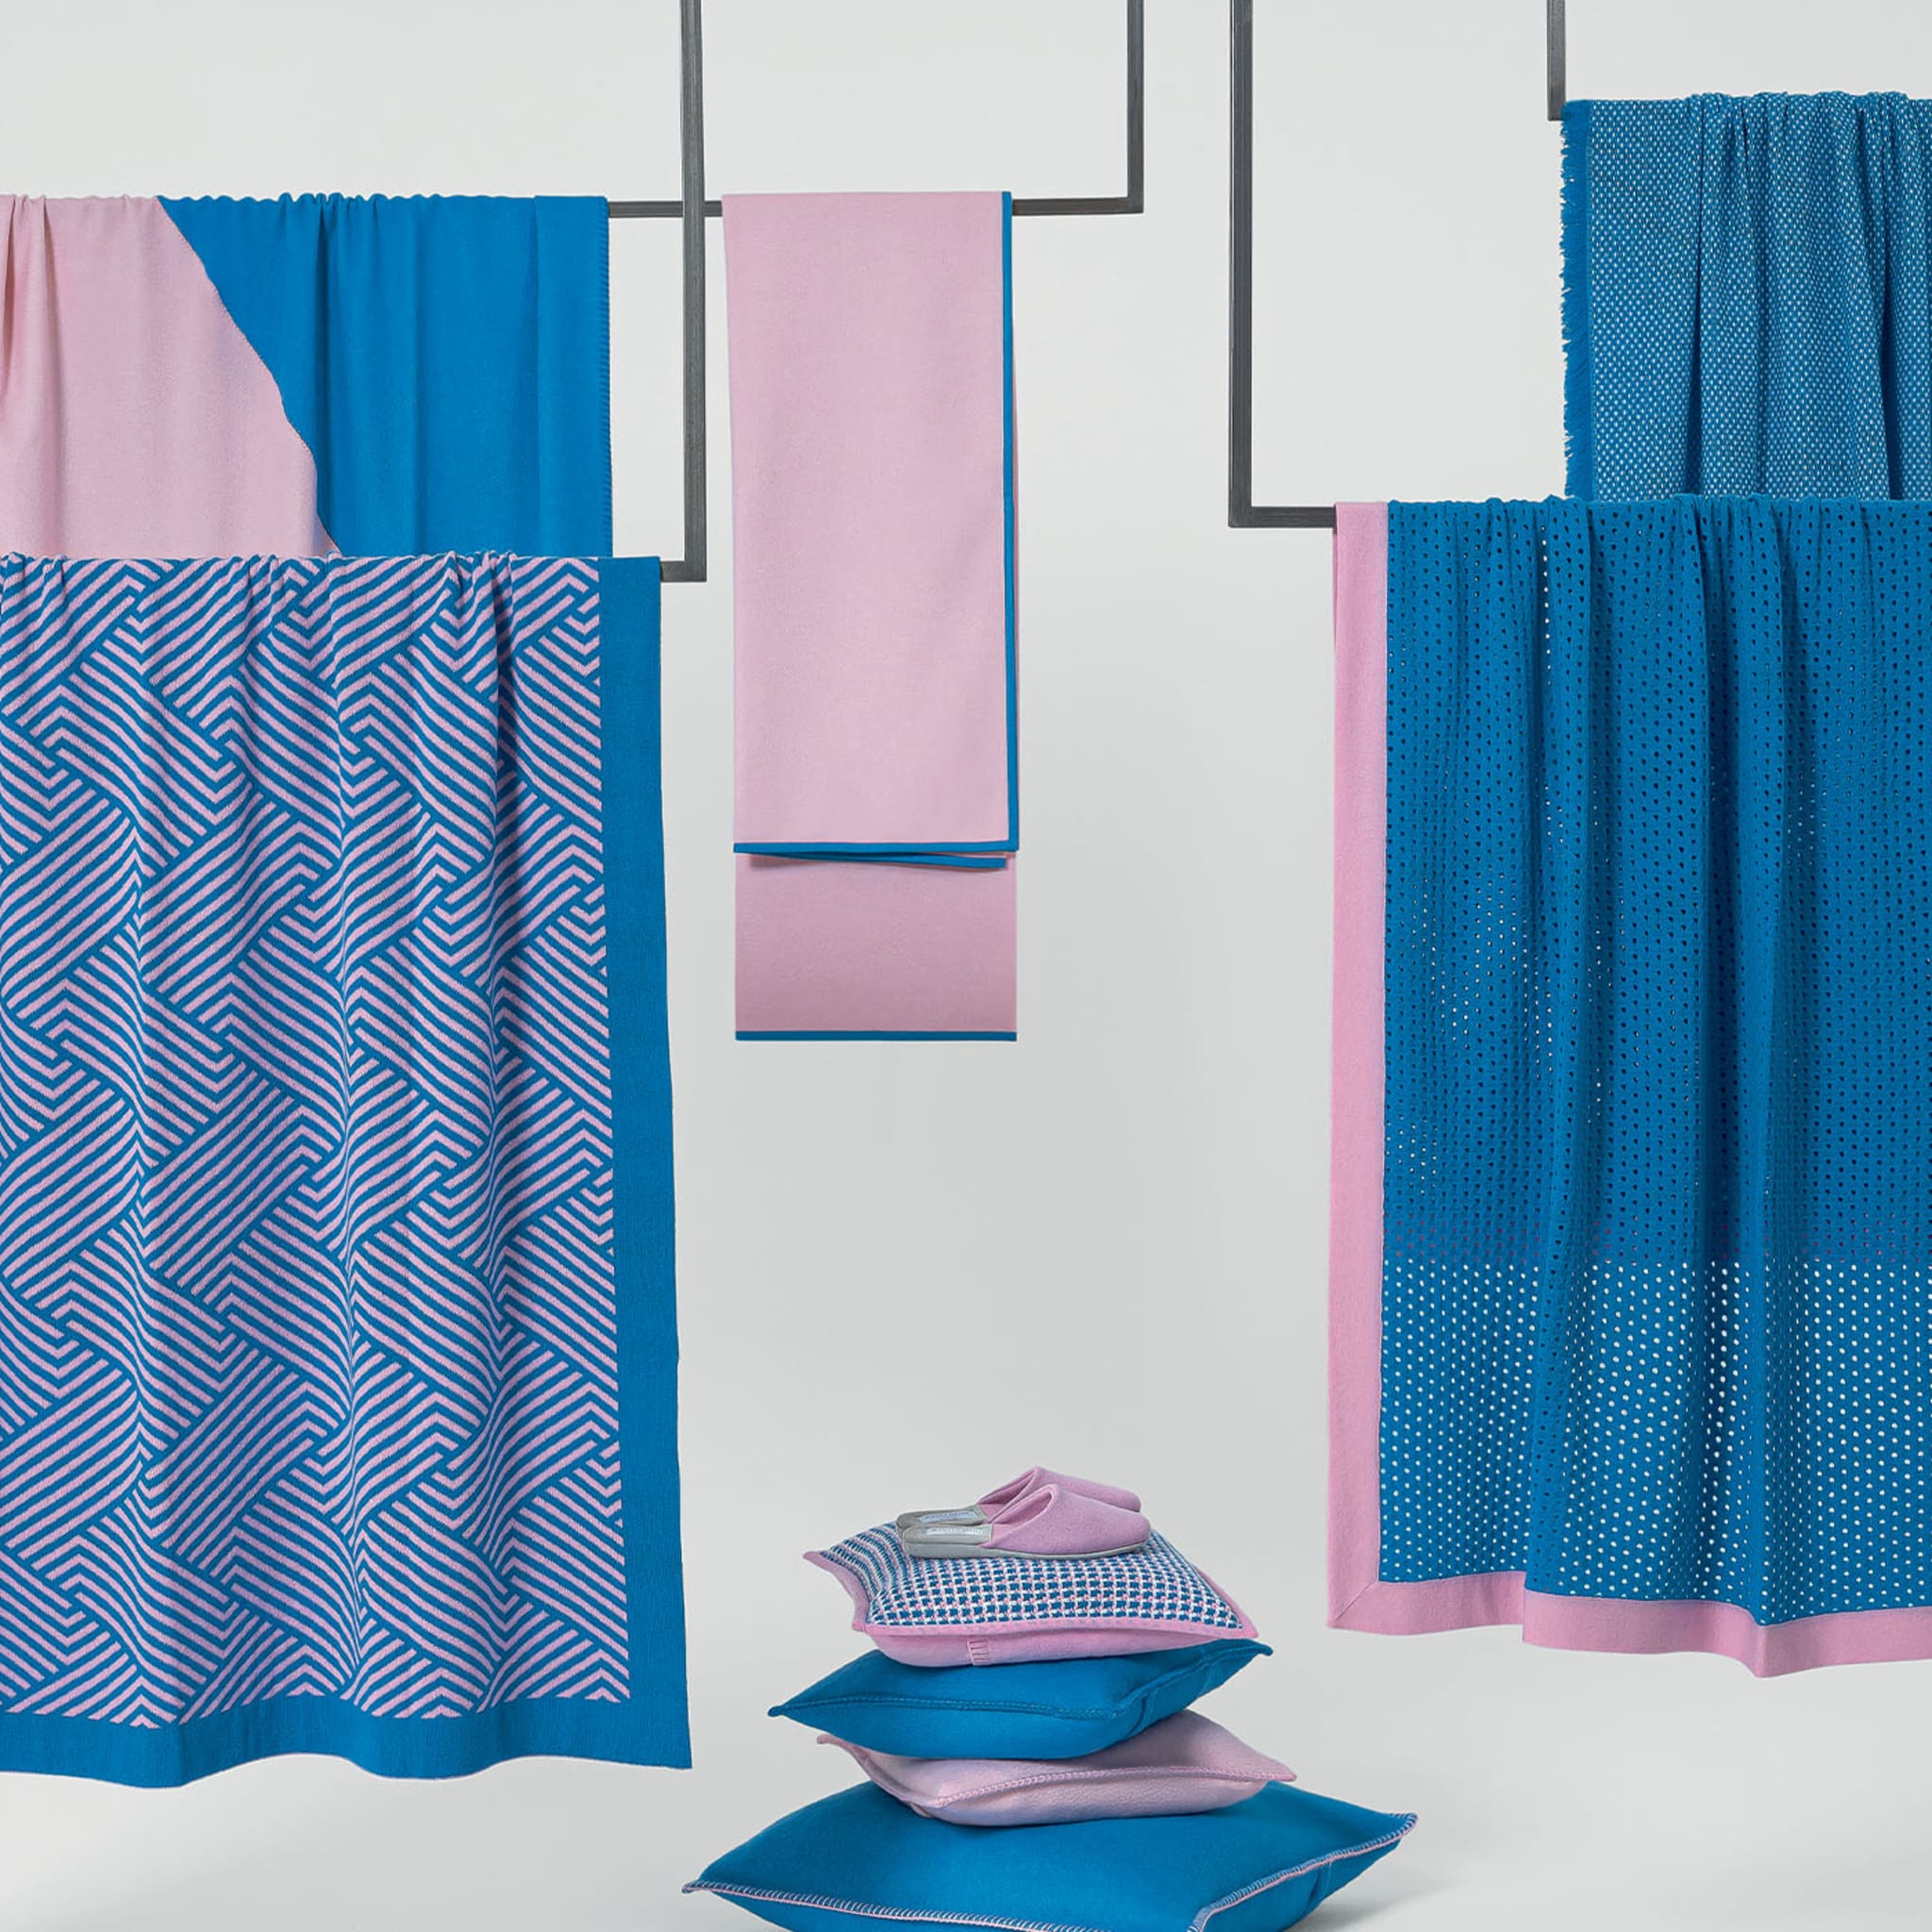 Biella Blue Leather and Pink Blanket - Alternative view 4